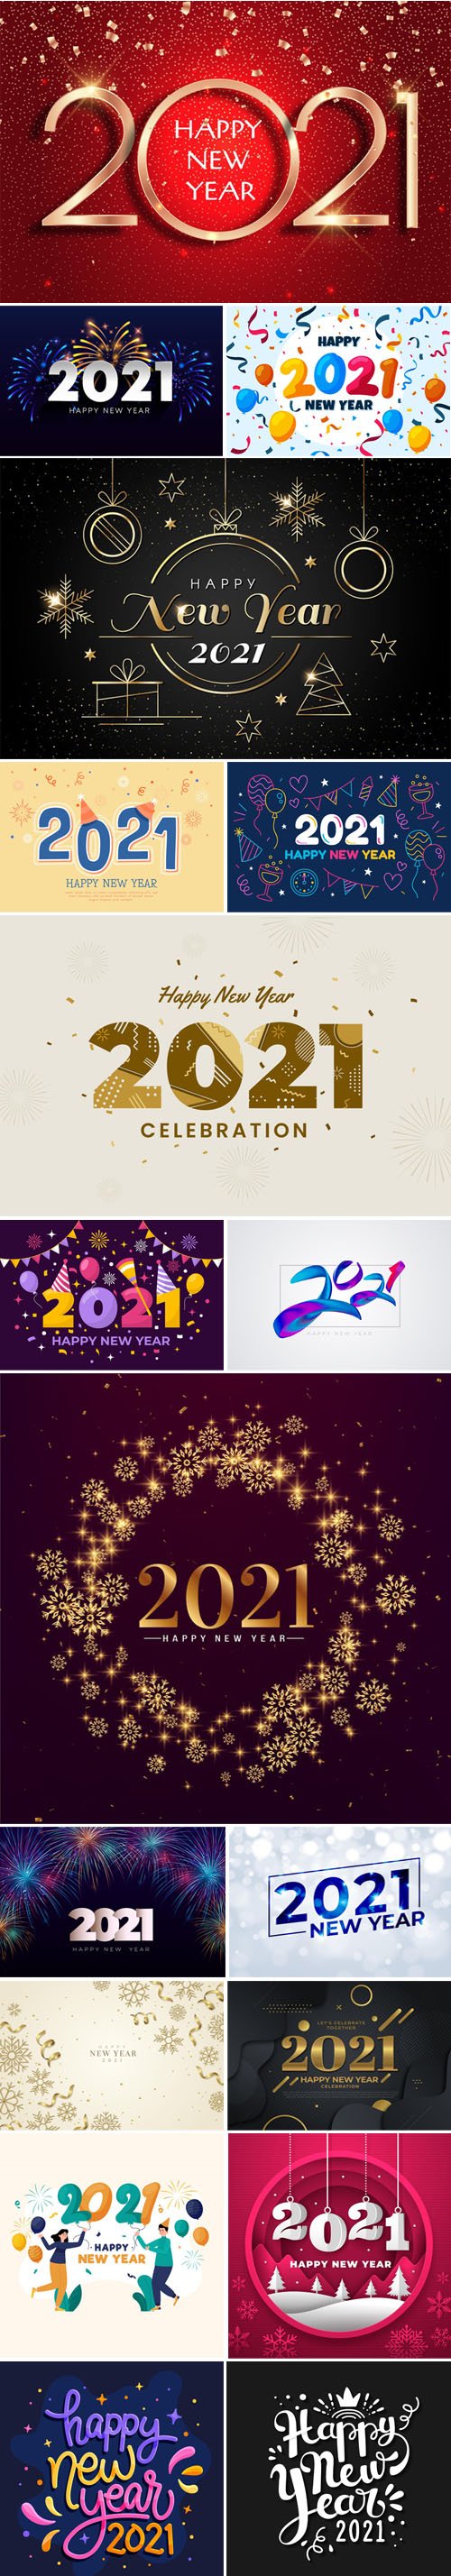 18 Happy New Year 2021 Backgrounds & Lettering Vector Collection